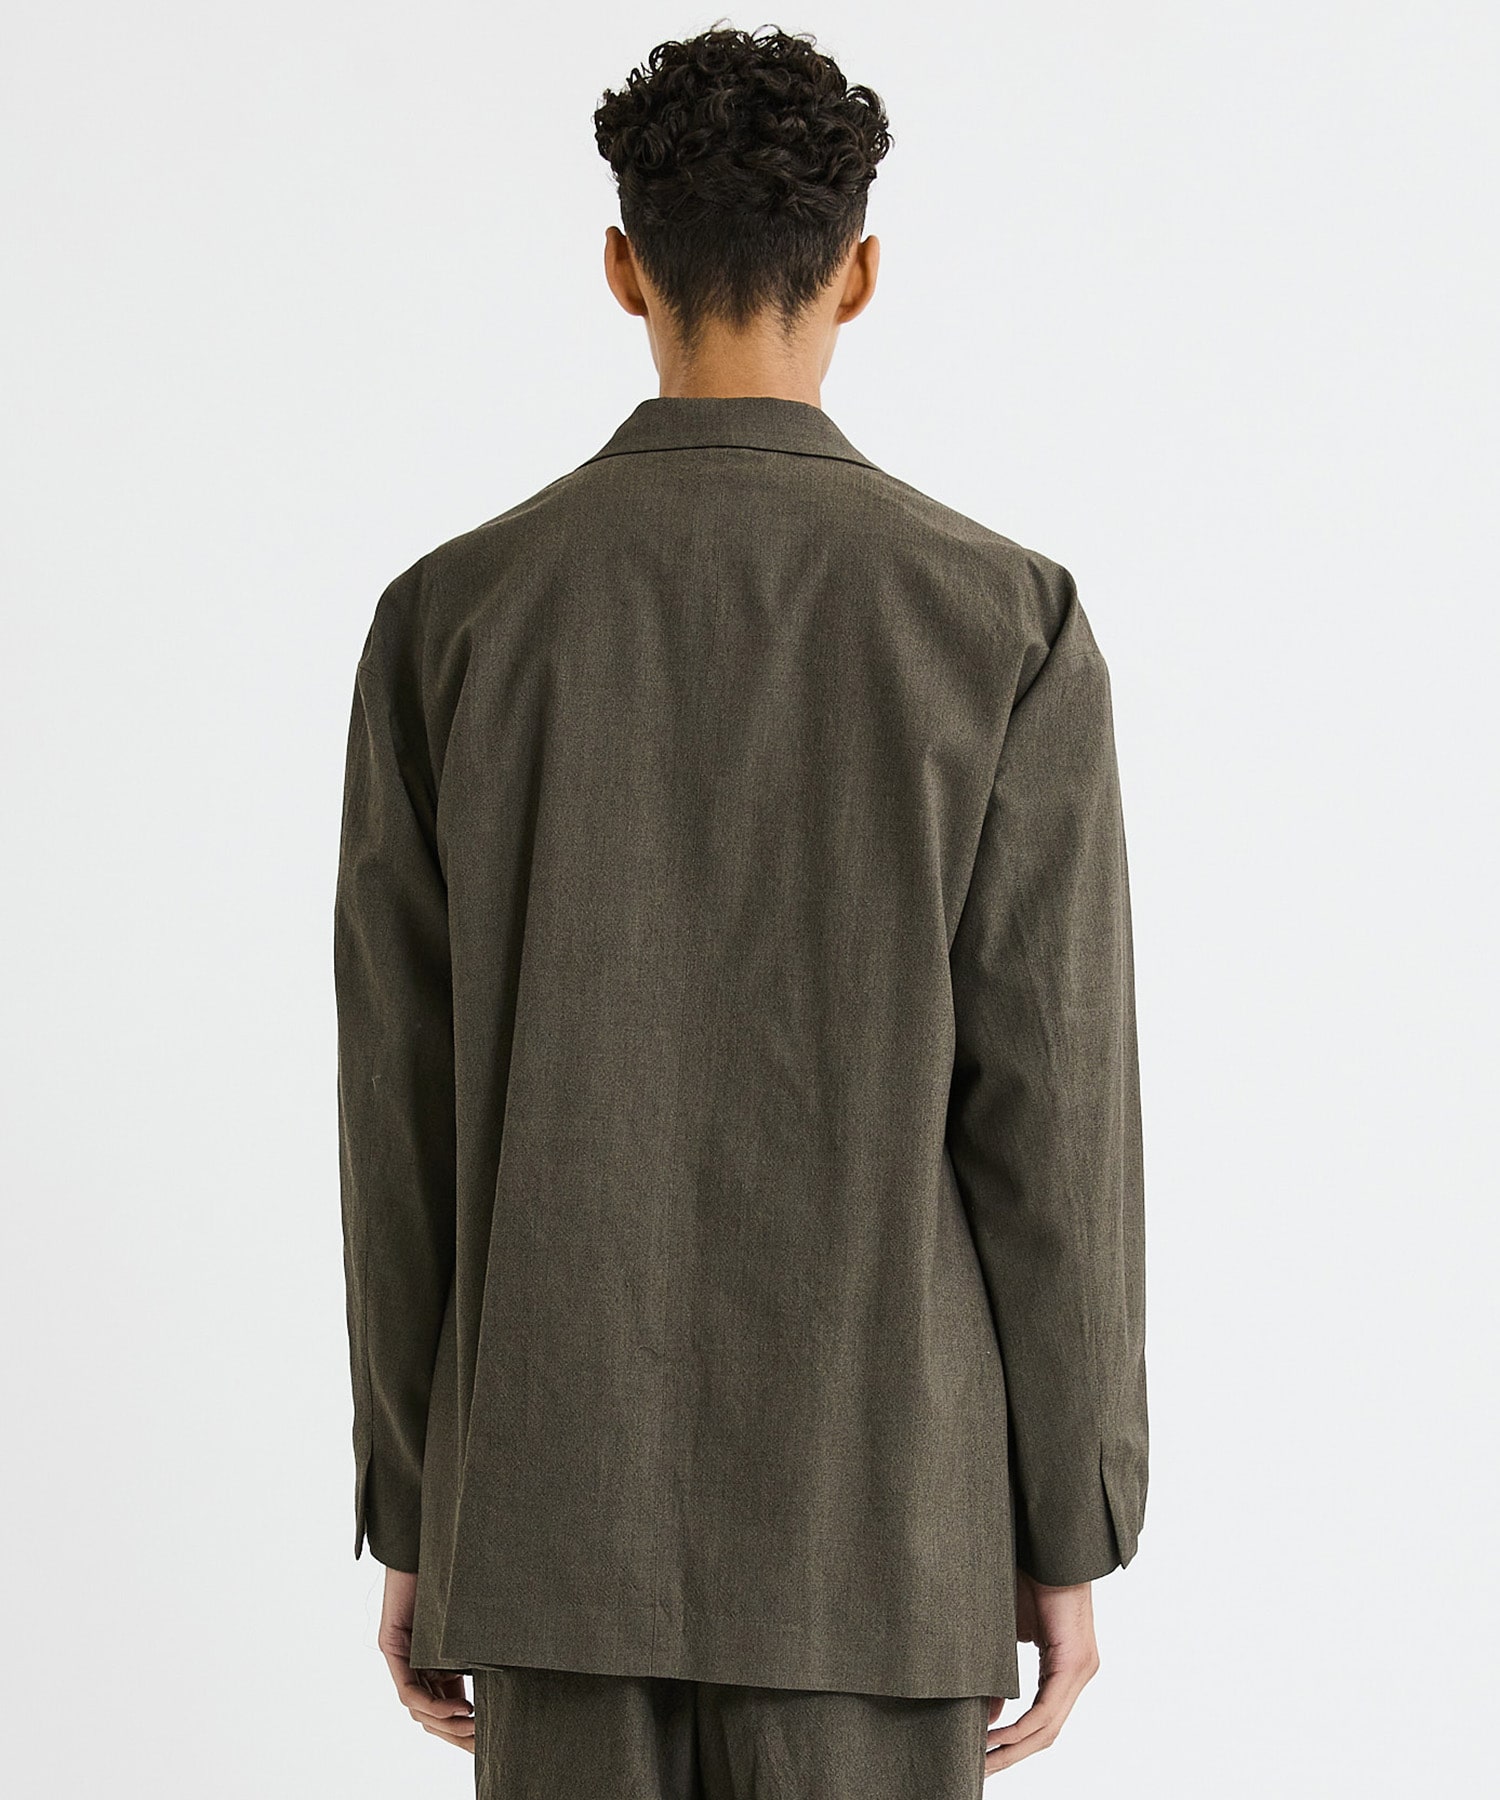 Over Silhouette Jacket 